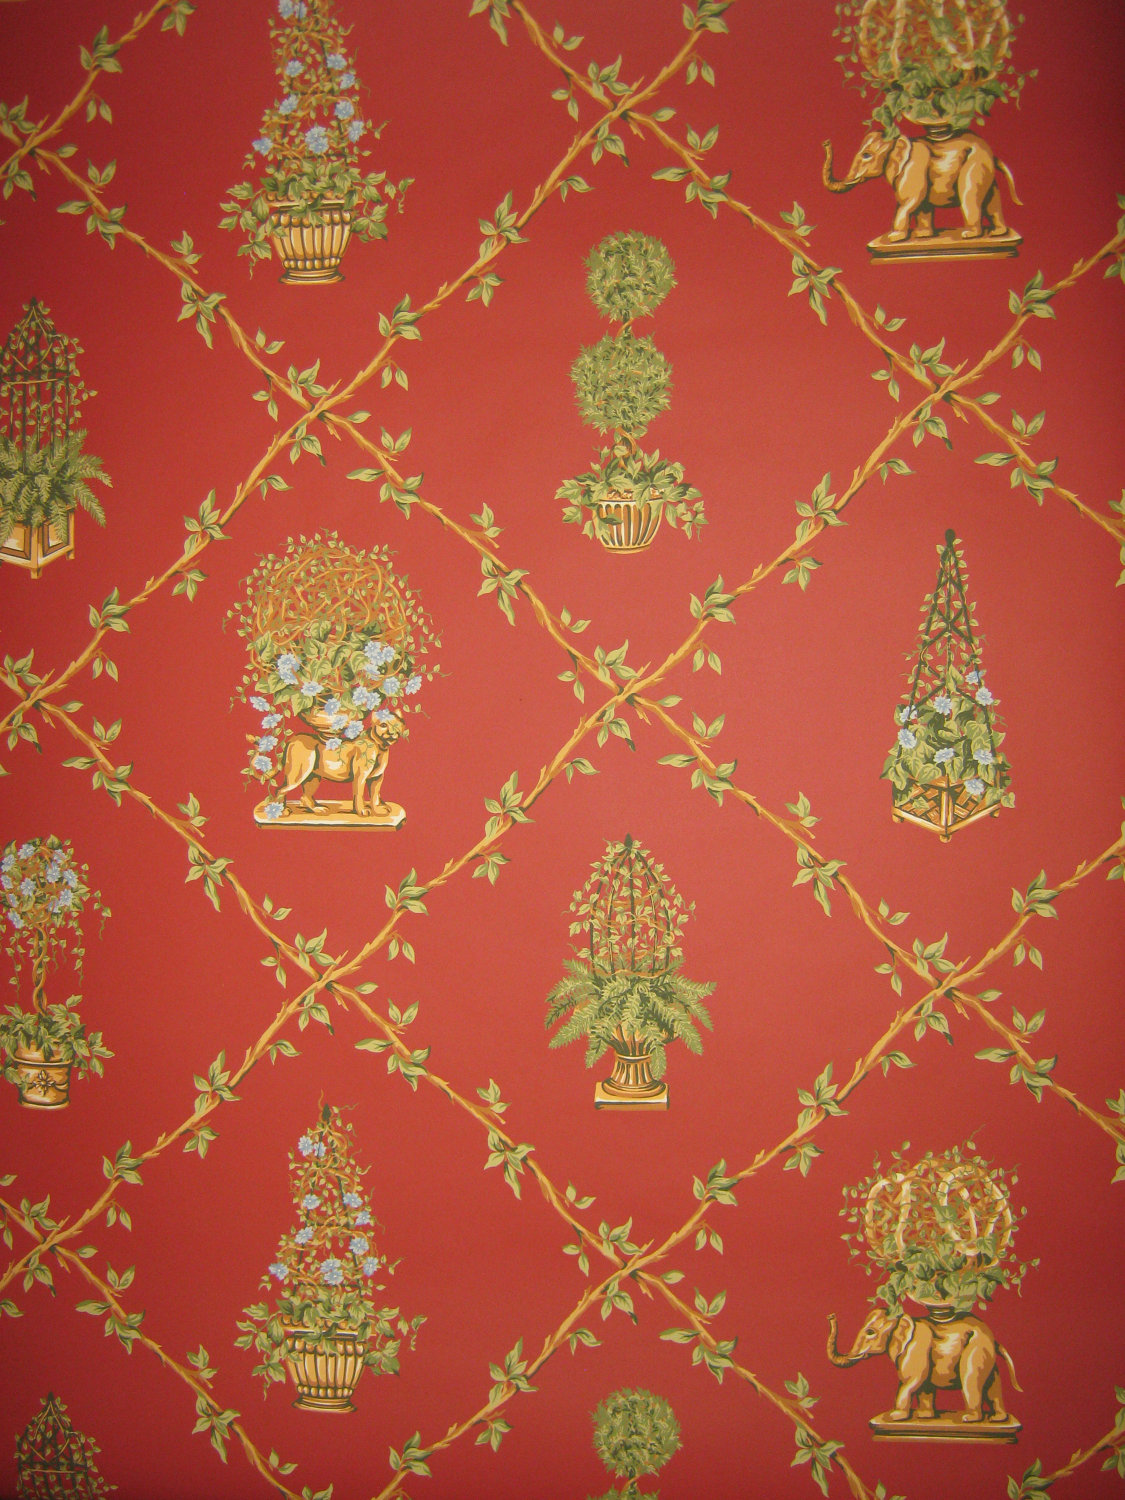 Roll Thibaut East Indian Inspired Trellis Wallpaper From Nycwallpaper